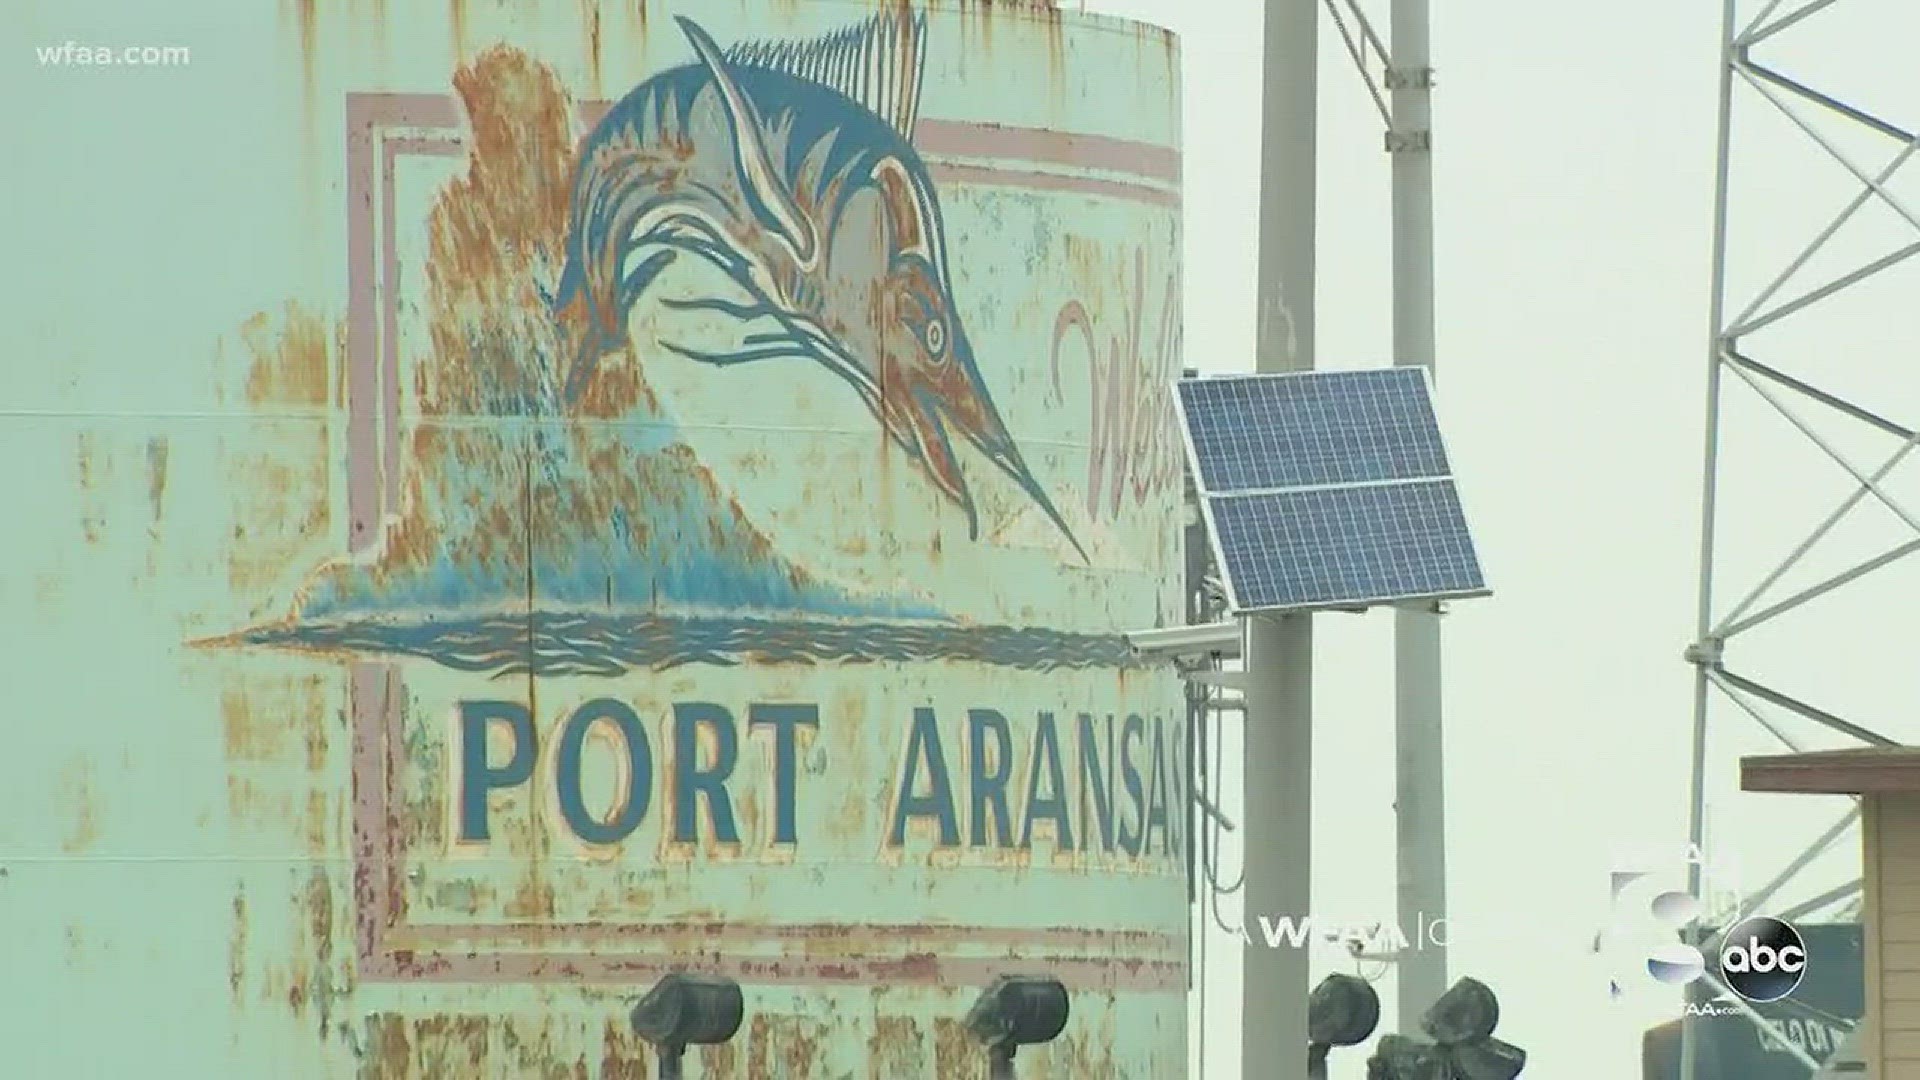 We take a look at what Port Aransas looks like nearly half a year after Hurricane Harvey wreaked havoc upon the popular Spring Break destination city on Mustang Island. Can Spring Breakers plan on travelling to Port Aransas and what can they expect from a